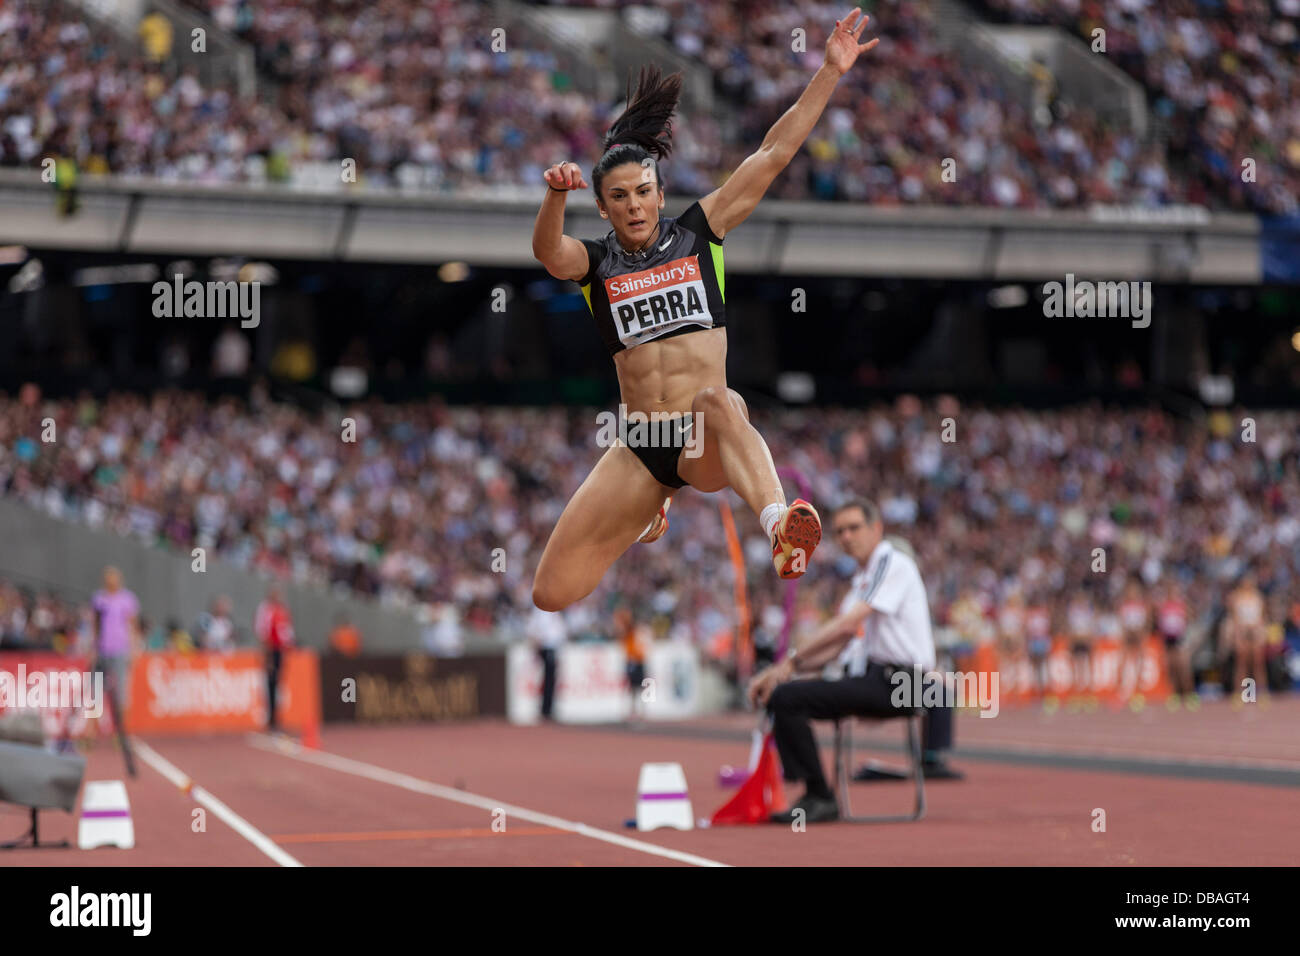 London, UK. 26th July, Athanasia Perra in action at the womens triple jump event, Anniversary Games British Athletics, London. 2013. Photo: Credit: Rebecca Andrews/Alamy Live News Stock Photo